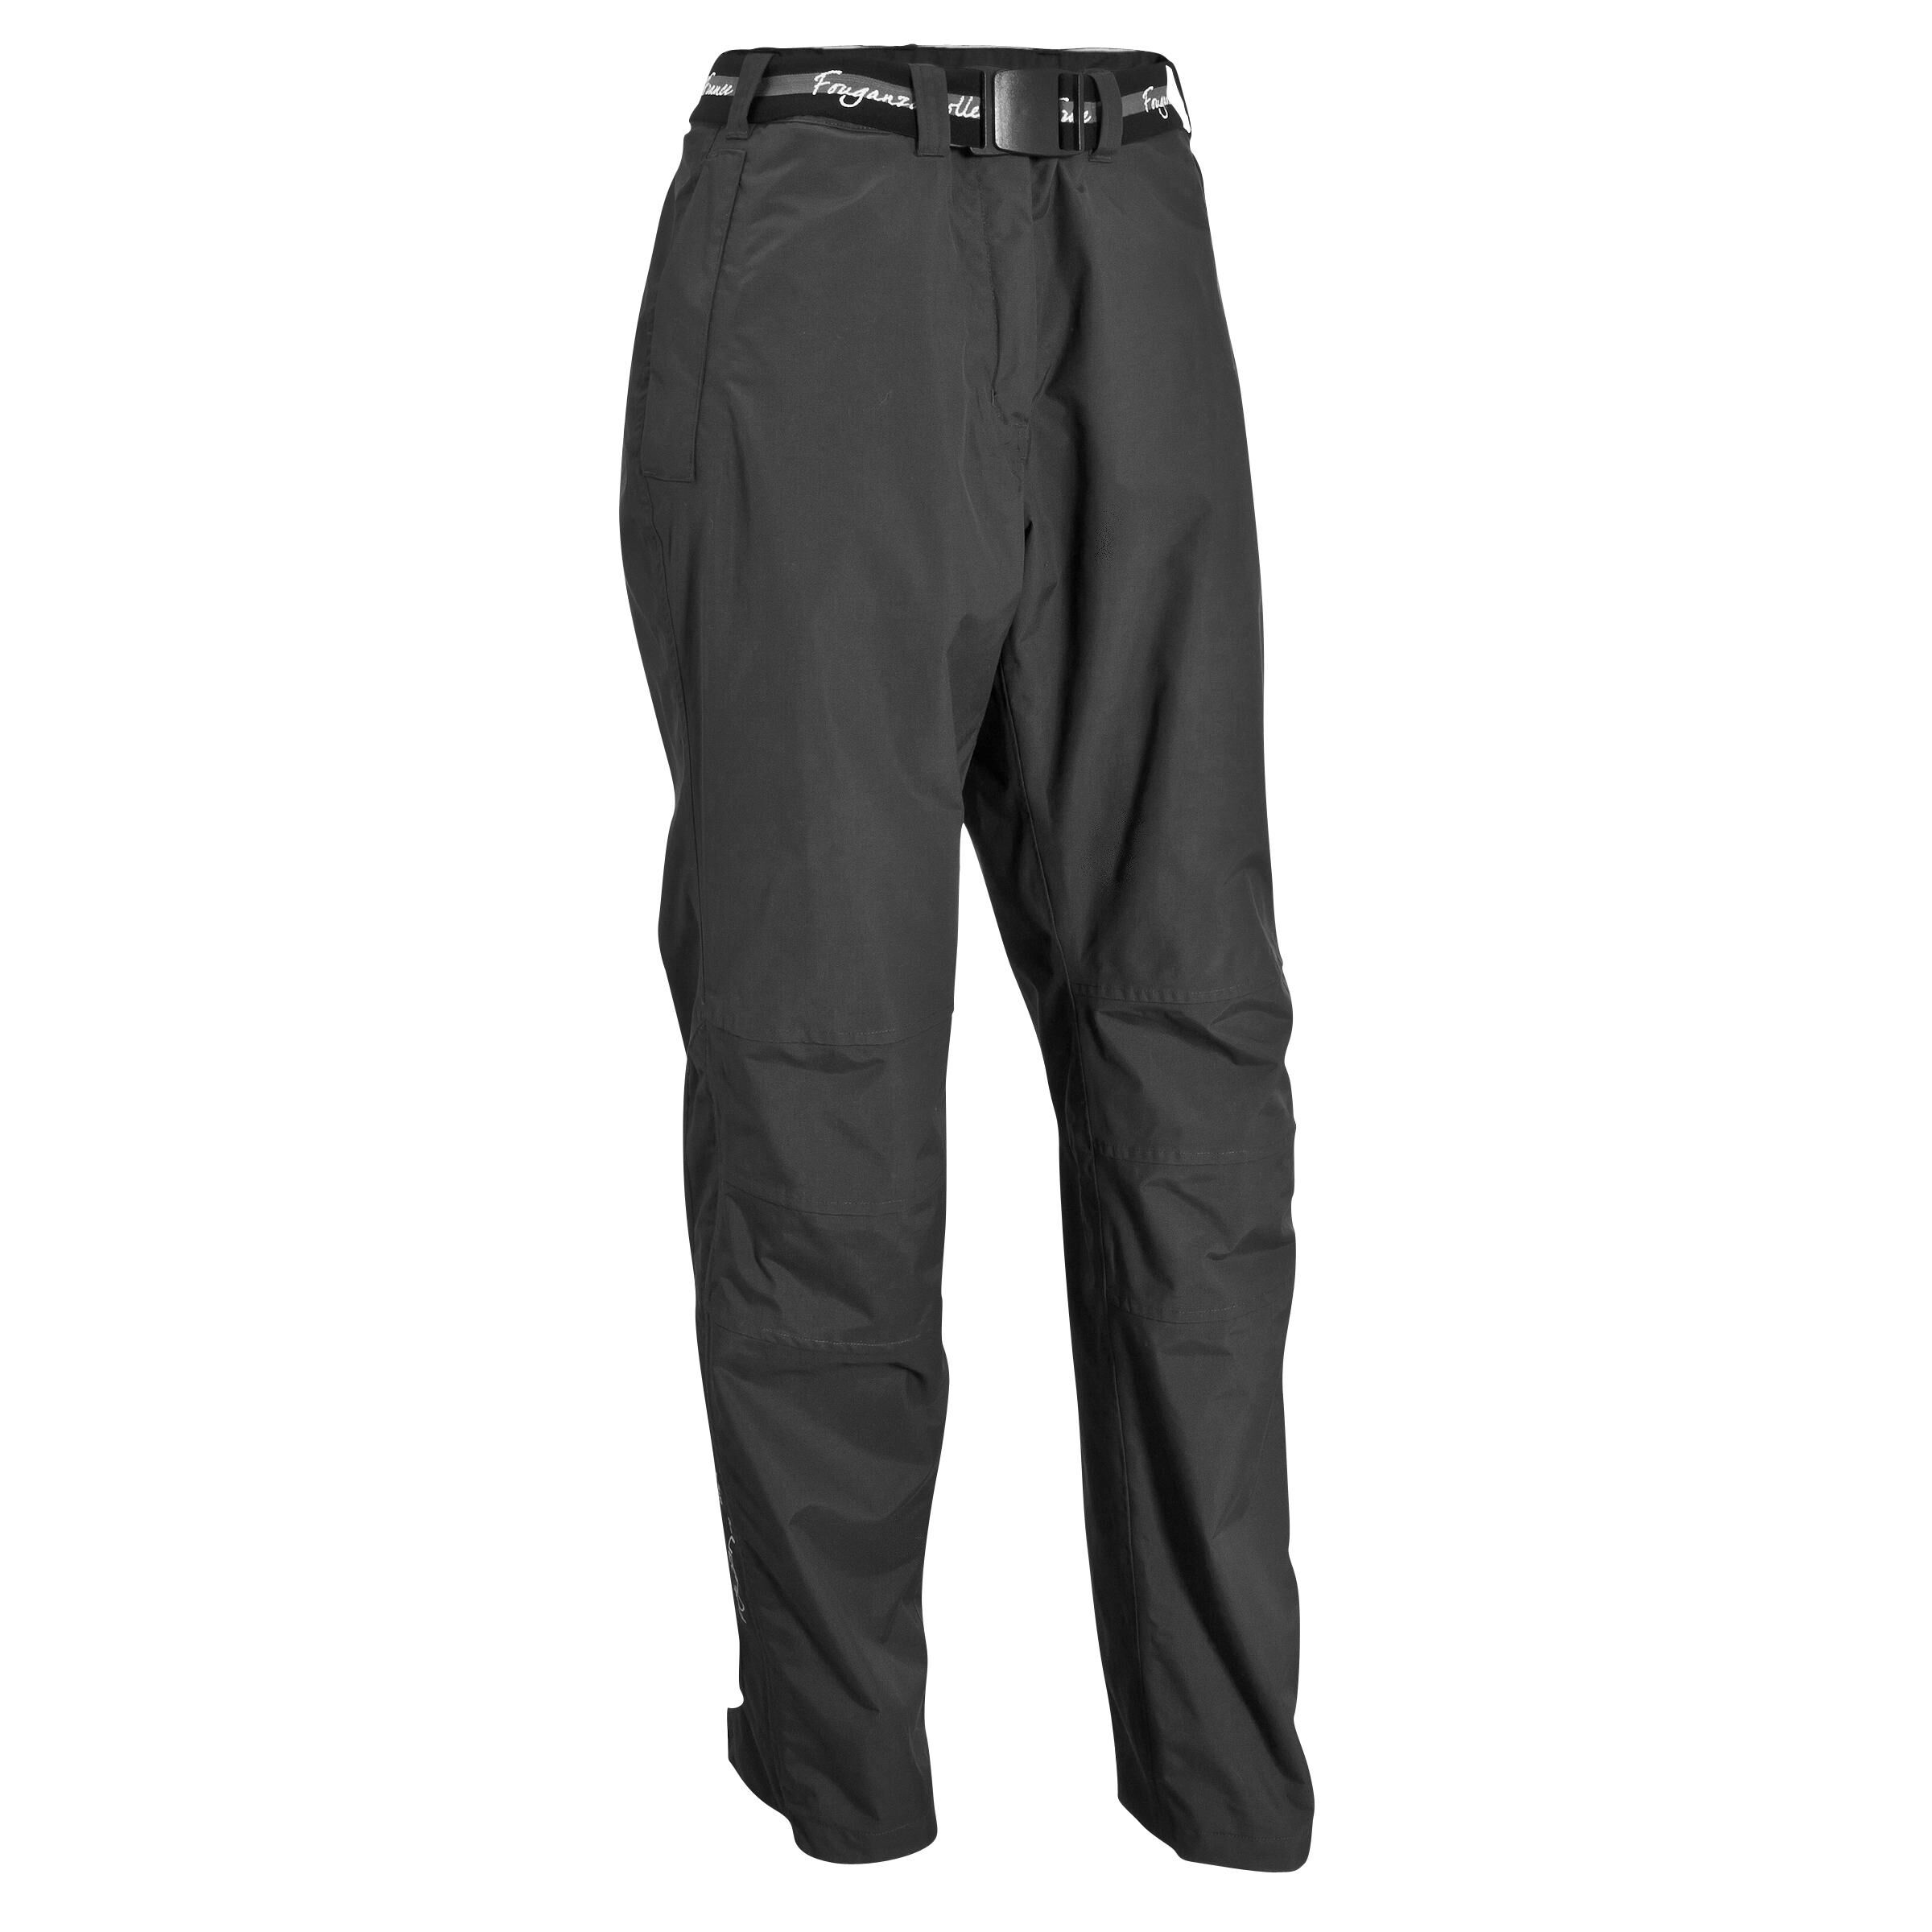 FOUGANZA 500 Adult 2-in1 Waterproof Horse Riding Overtrousers - Black